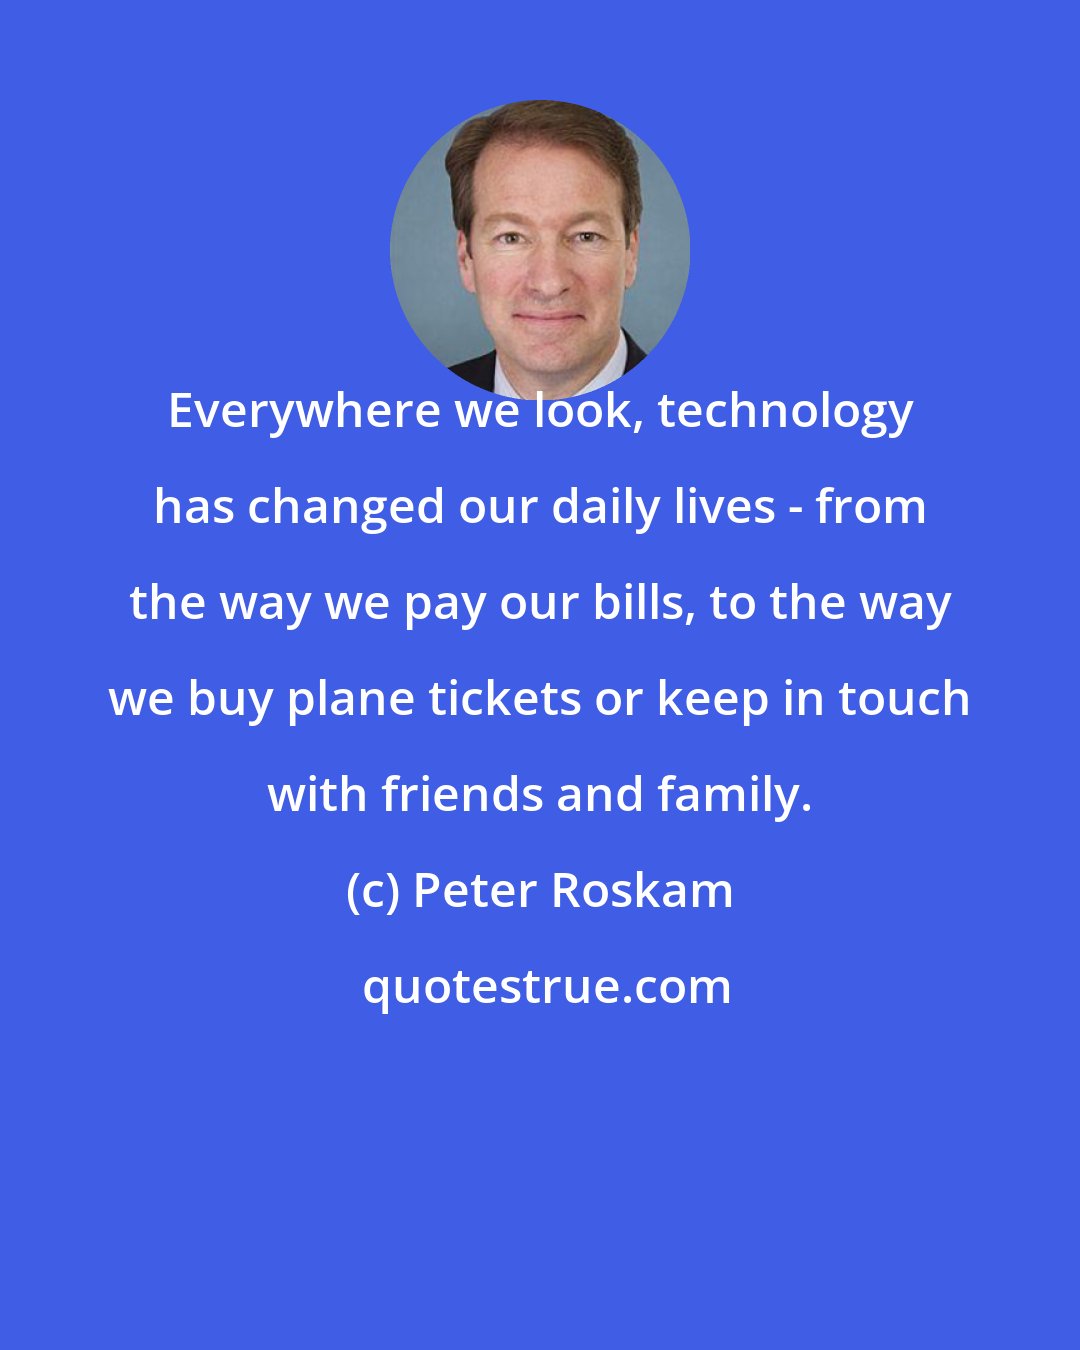 Peter Roskam: Everywhere we look, technology has changed our daily lives - from the way we pay our bills, to the way we buy plane tickets or keep in touch with friends and family.